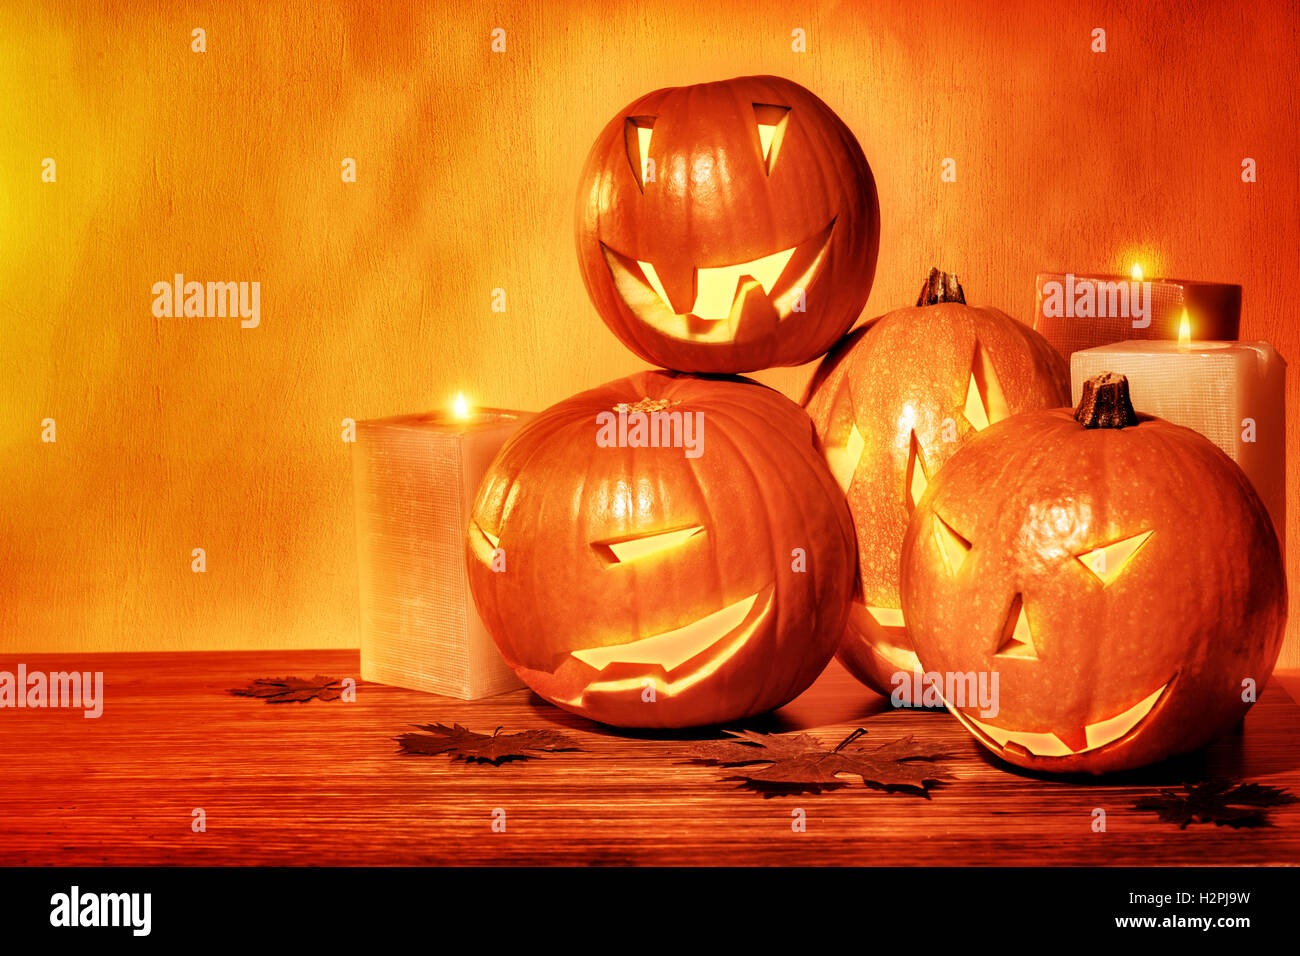 Grunge style photo of a carved pumpkins with scary faces and glowing candles on the table, festive party decoration Stock Photo